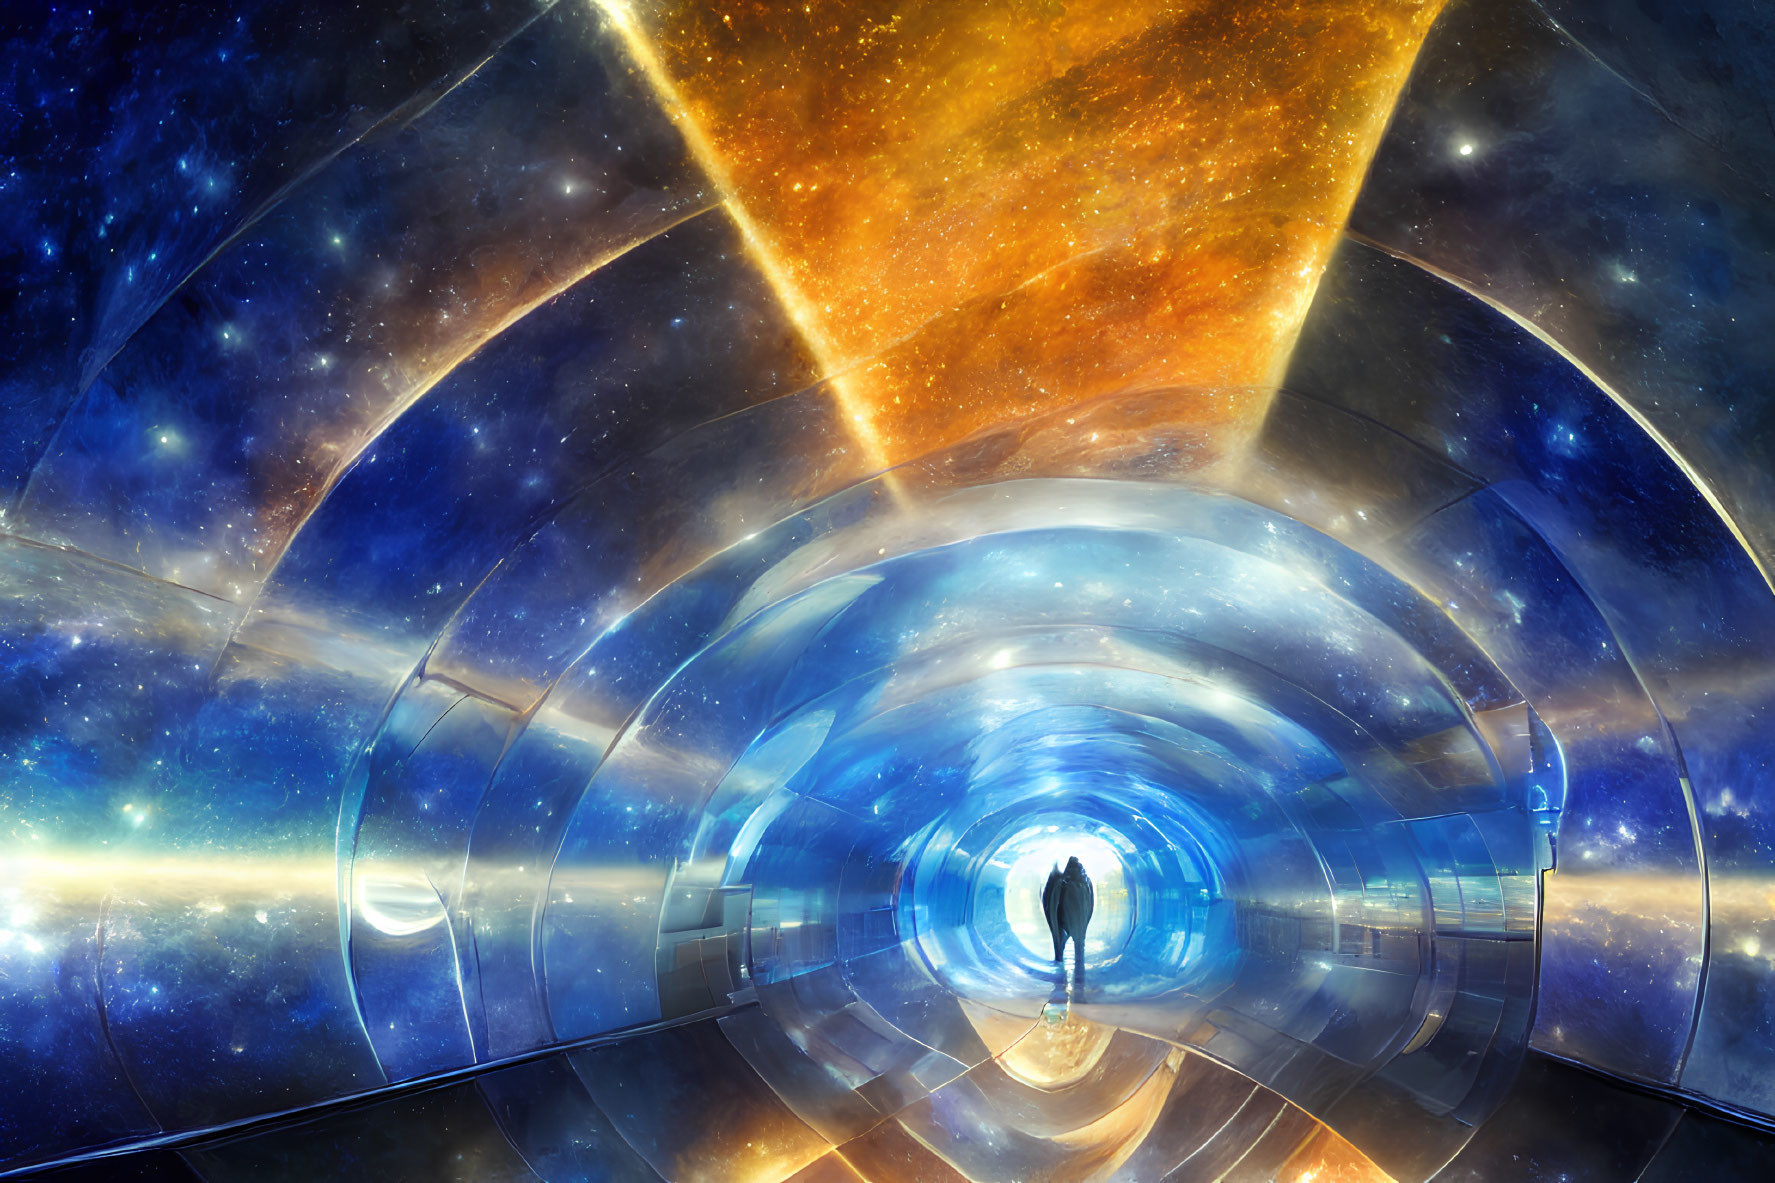 Futuristic tunnel with cosmic imagery and vibrant blue and orange hues